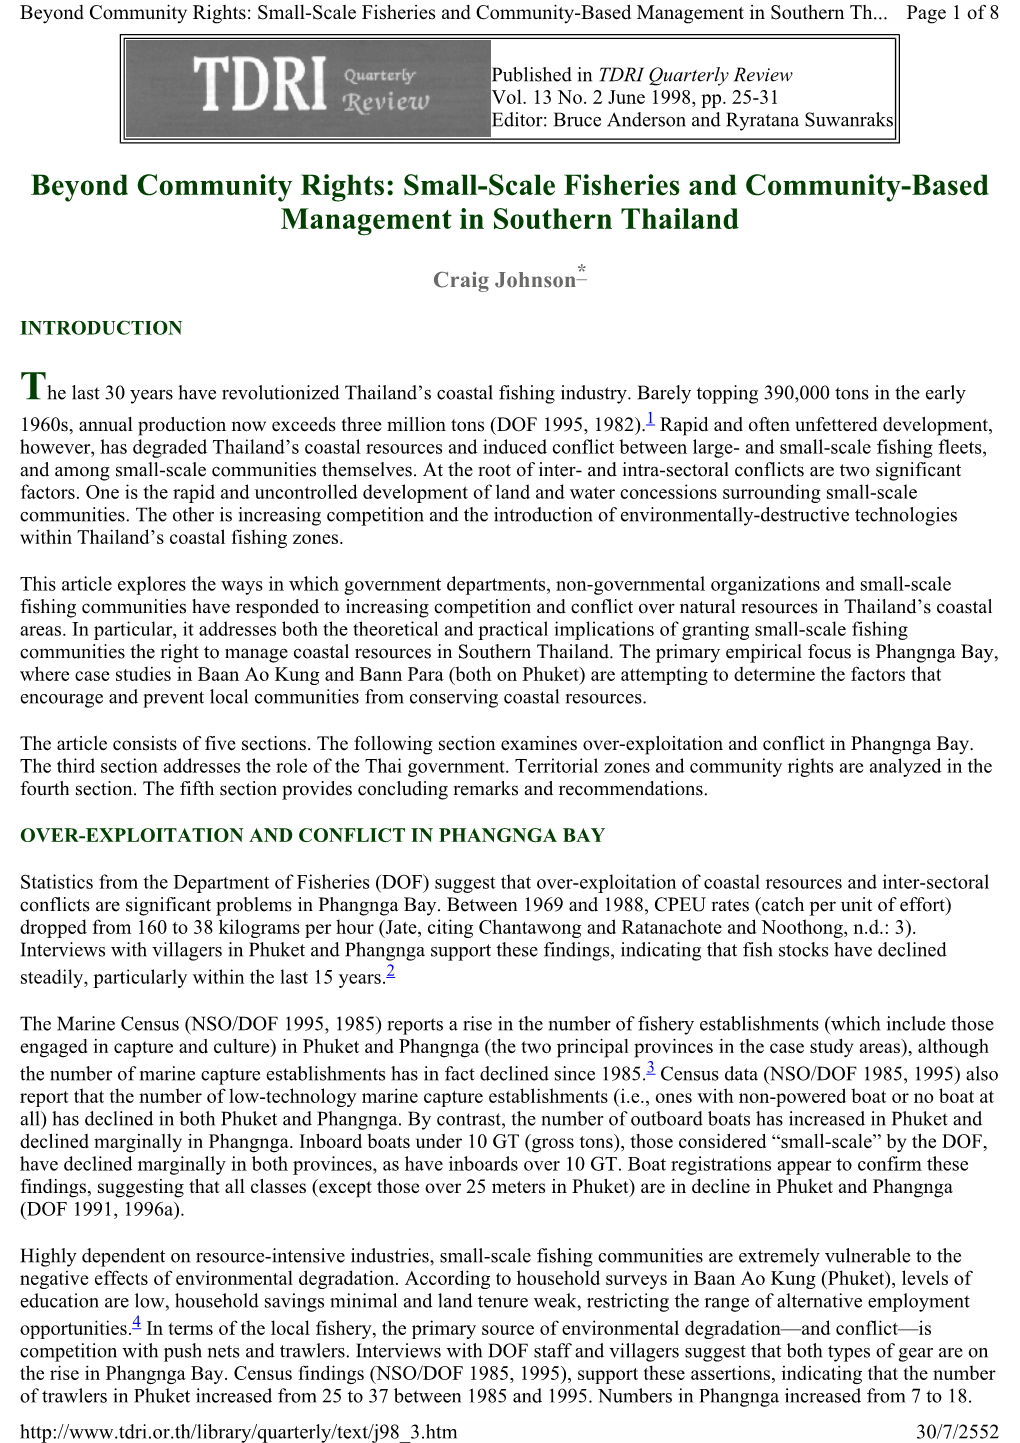 Small-Scale Fisheries and Community-Based Management in Southern Thailand